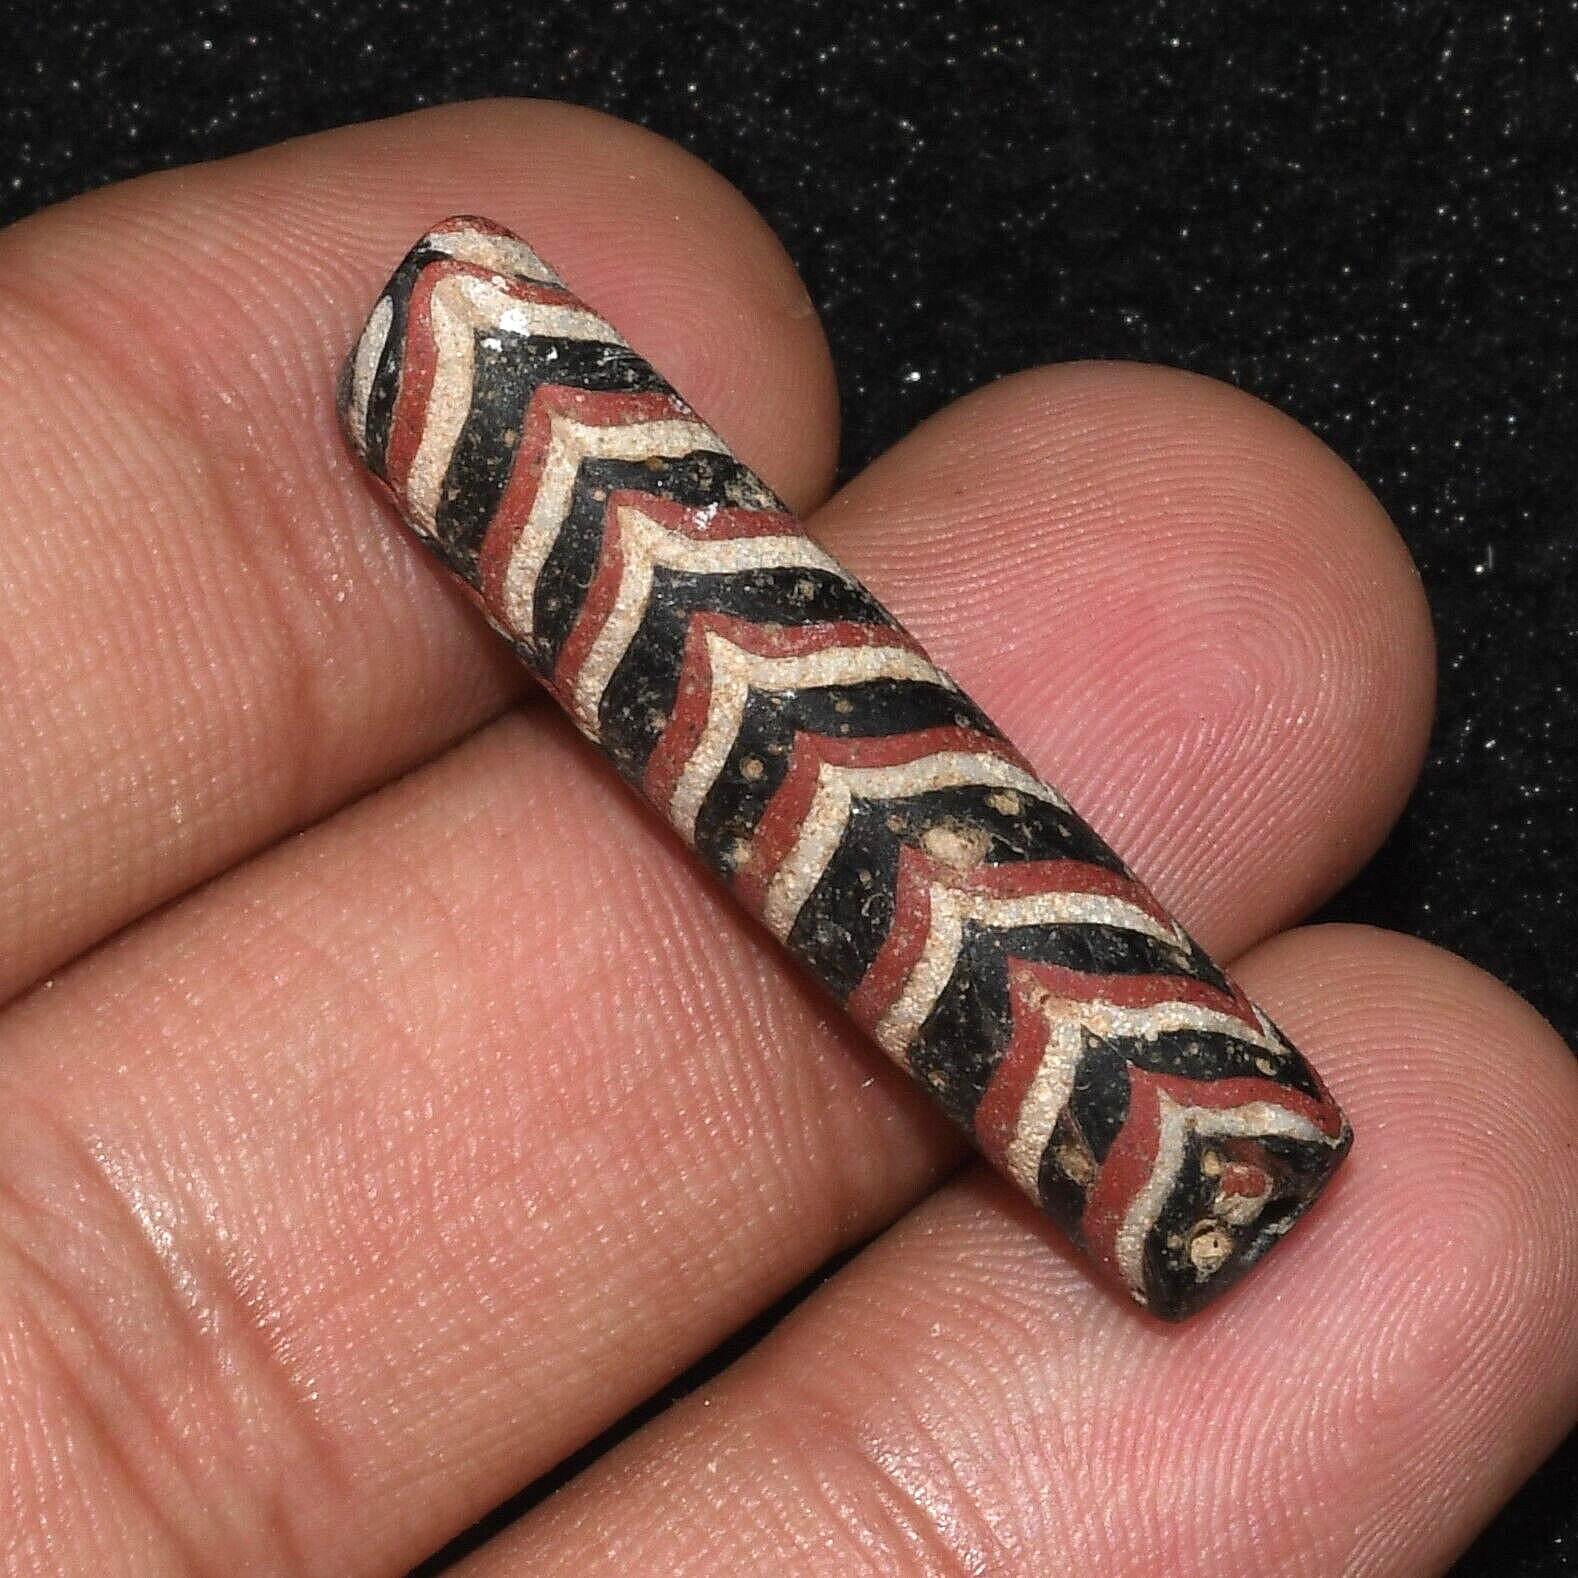 Genuine Ancient Mosaic Gabri Glass Bead with Multiple Stripes in Good Condition